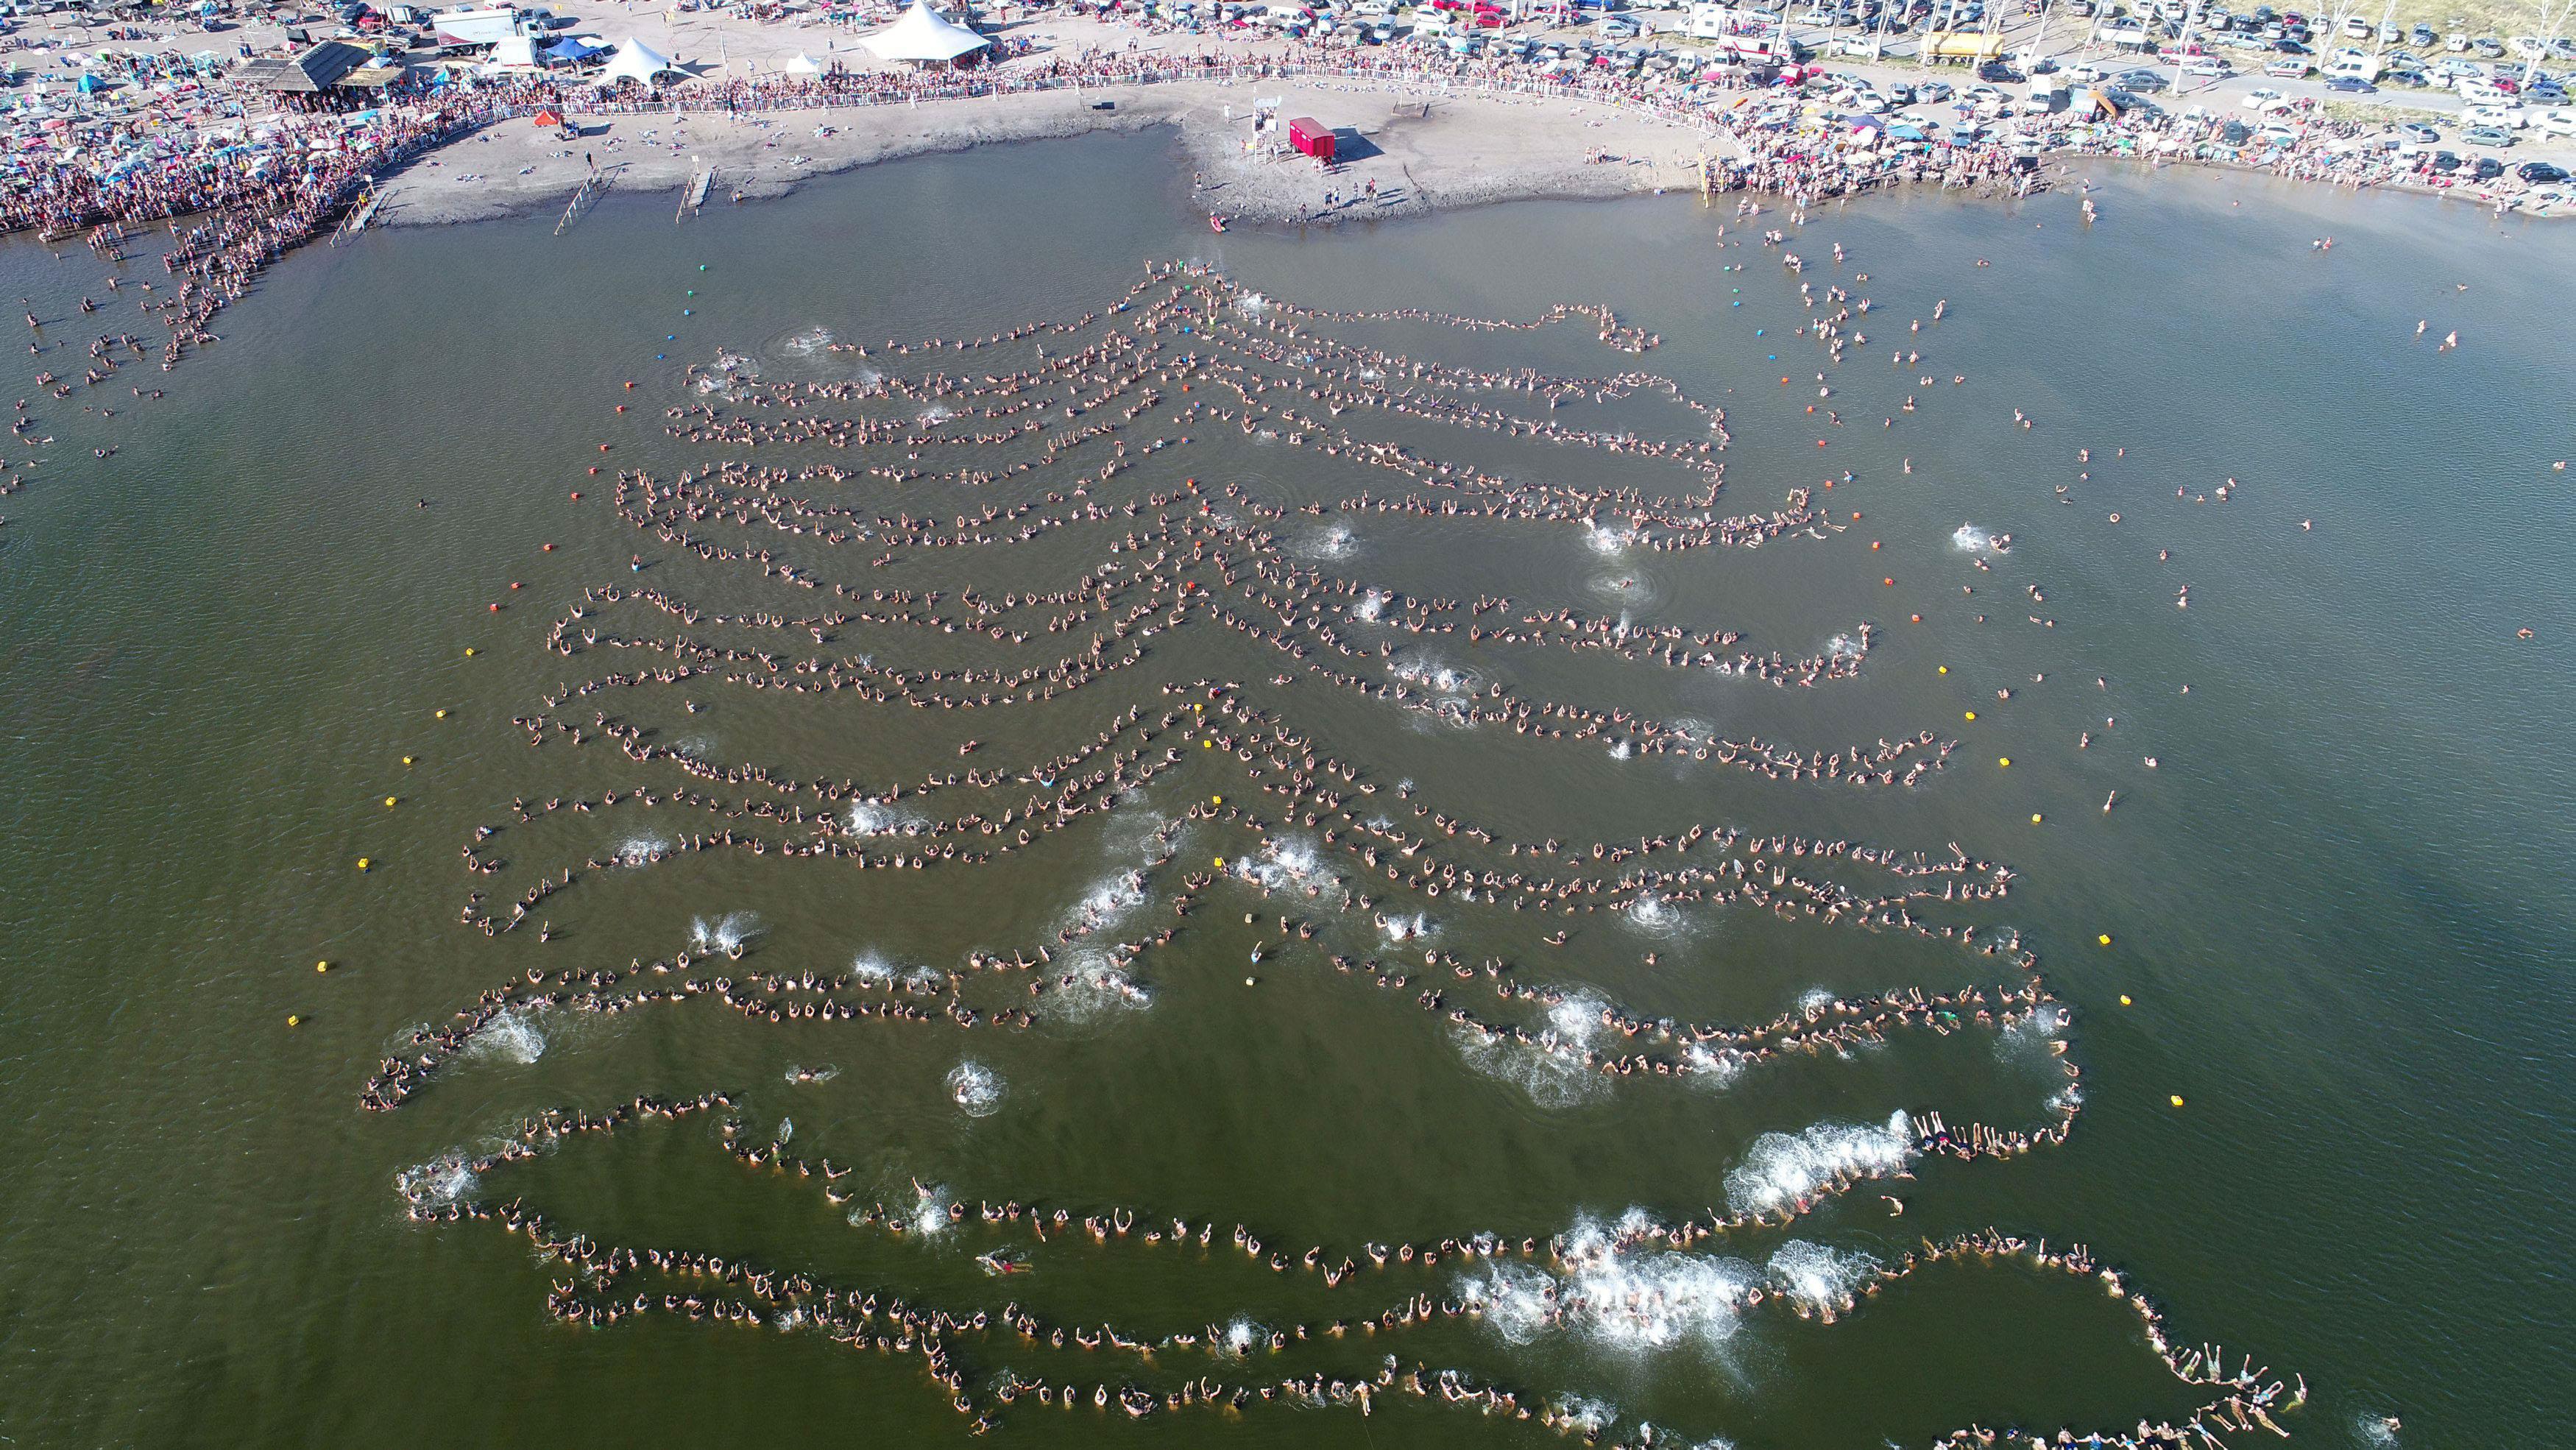 Nearly 2,000 people float in a line setting a new Guinness world record for the most people floating